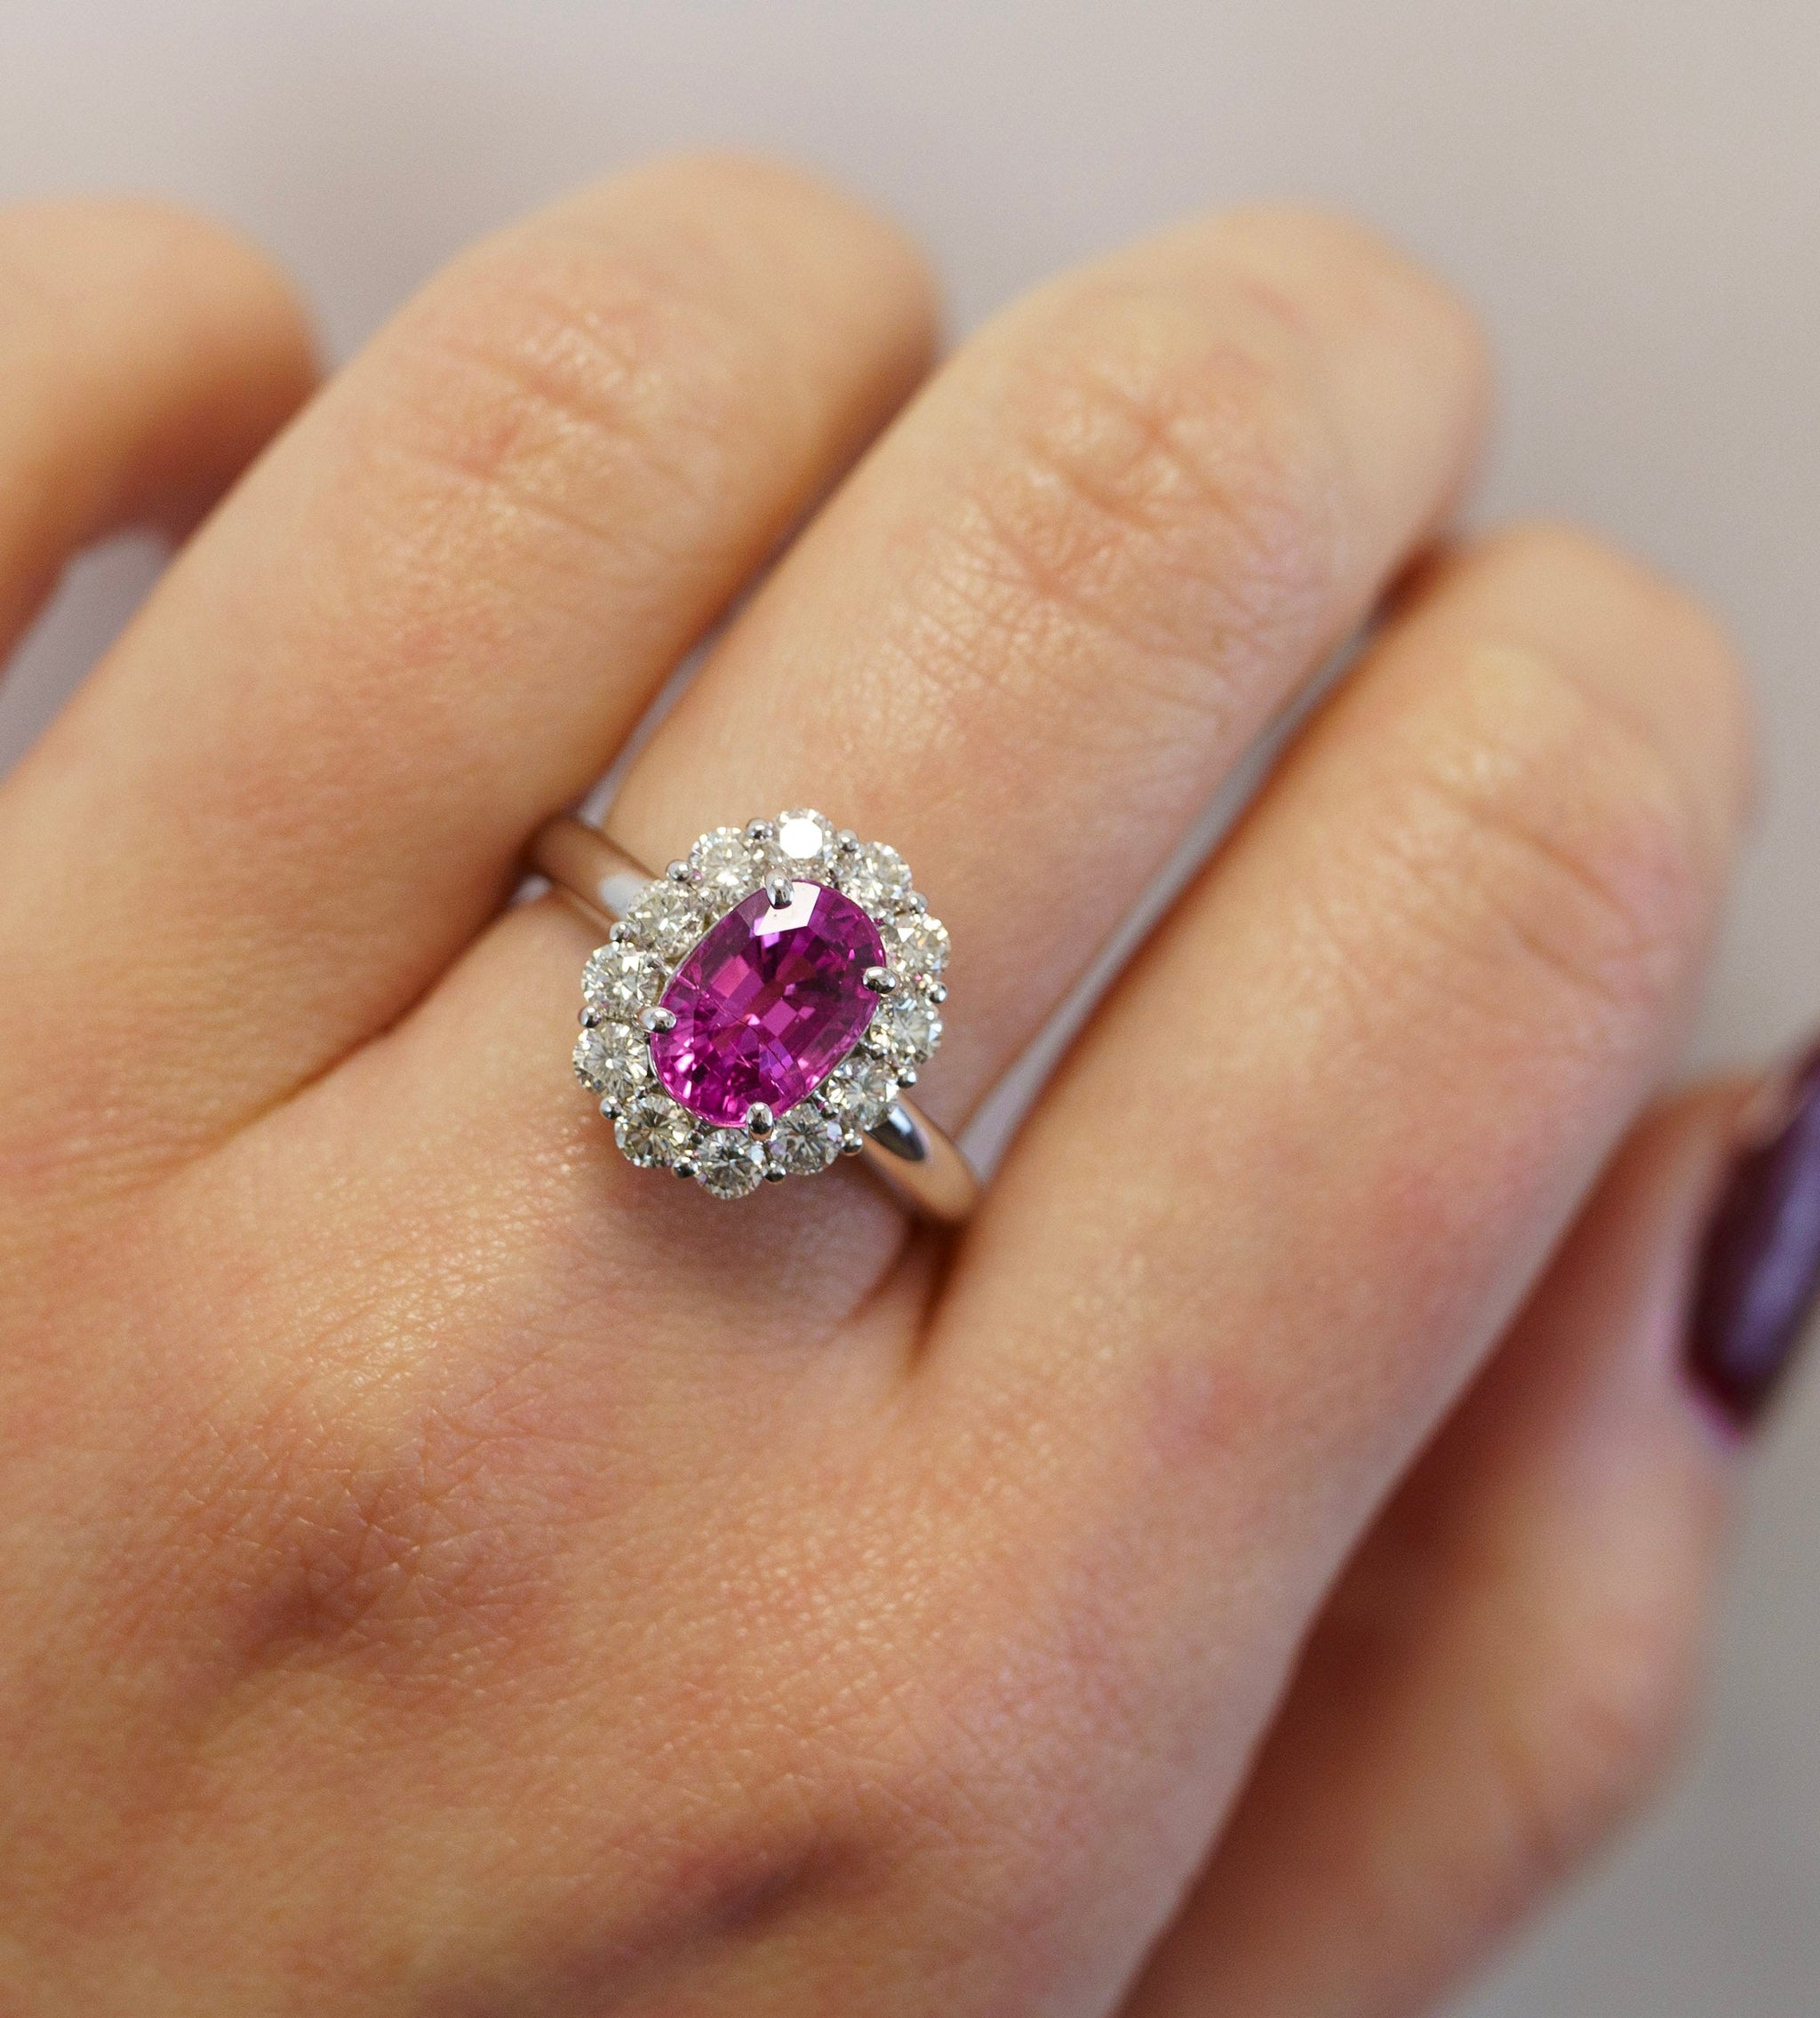 3 Carat Carat Oval Pink Sapphire Ring, Hidden Halo Gold Engagement Ring